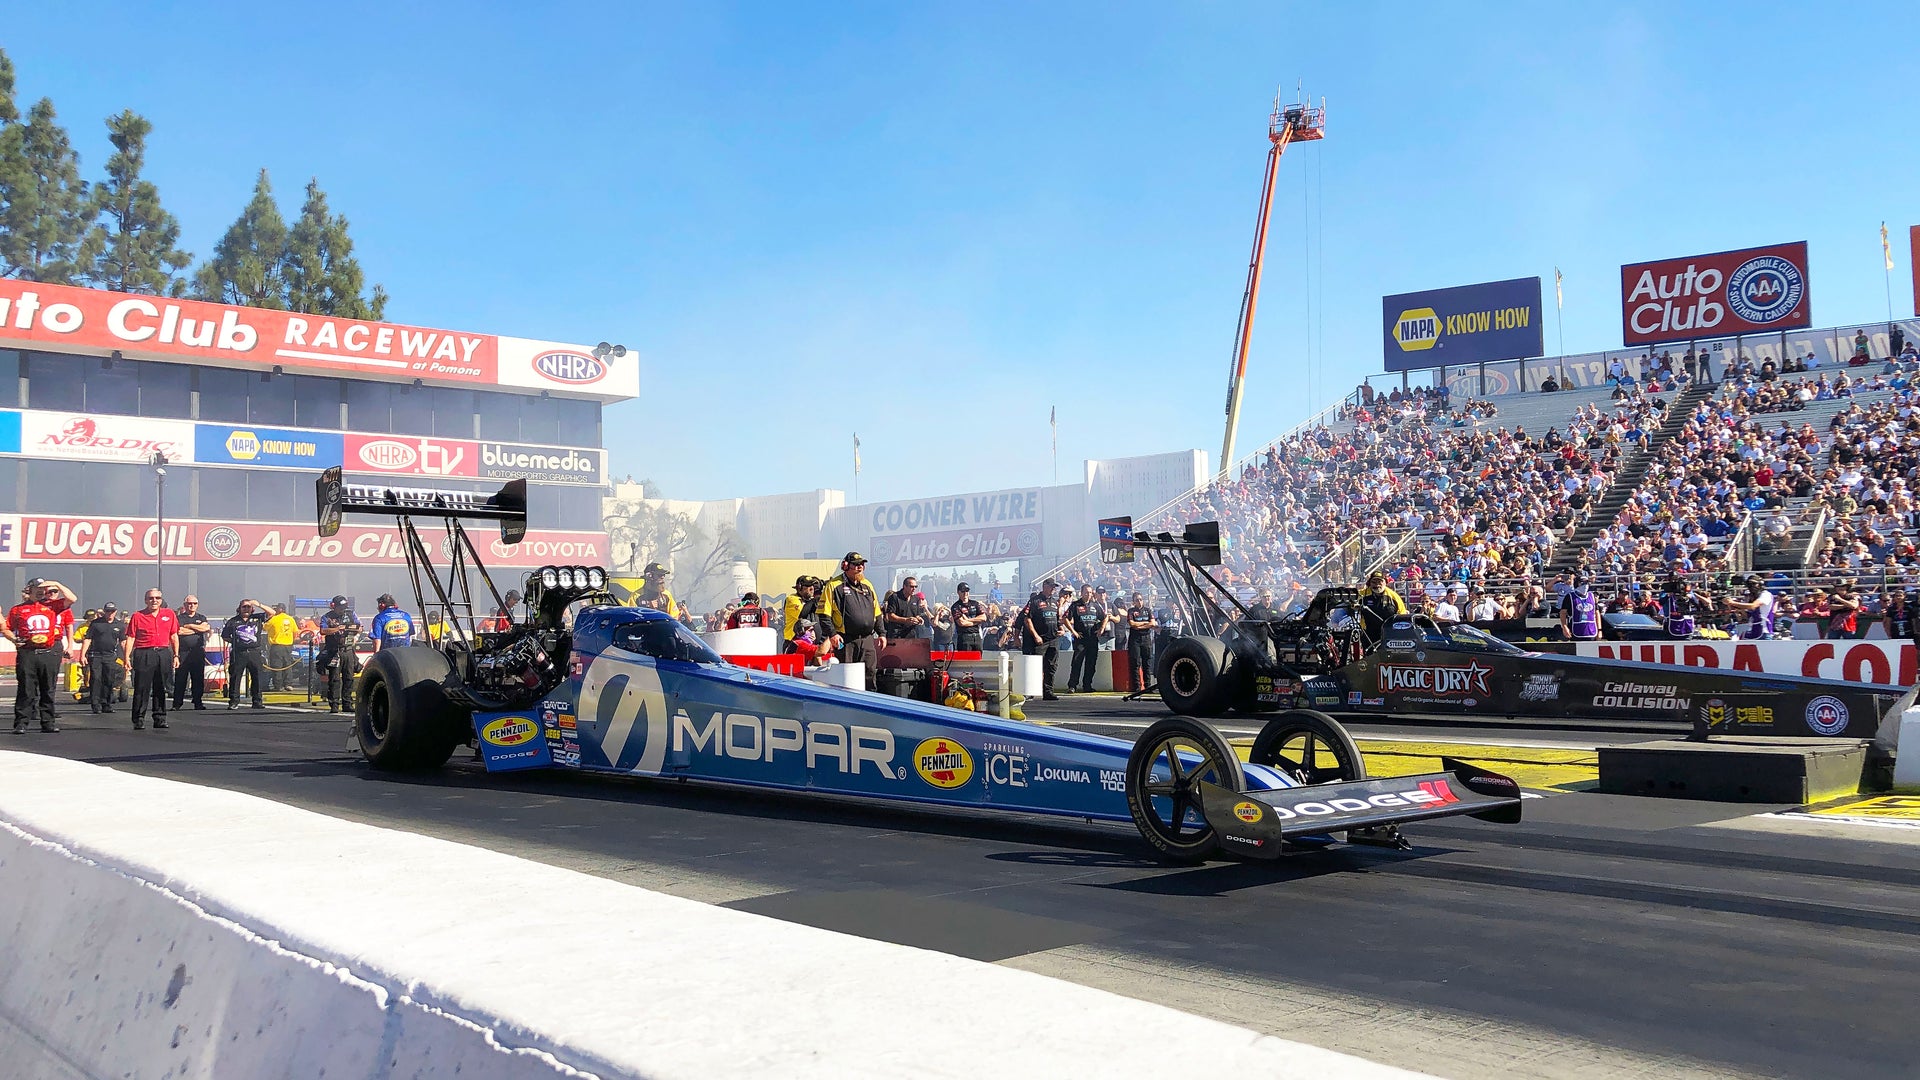 Leah raced to a semifinal finish and improved one spot up to fourth behind the wheel of her MOPAR-powered Top Fuel dragster